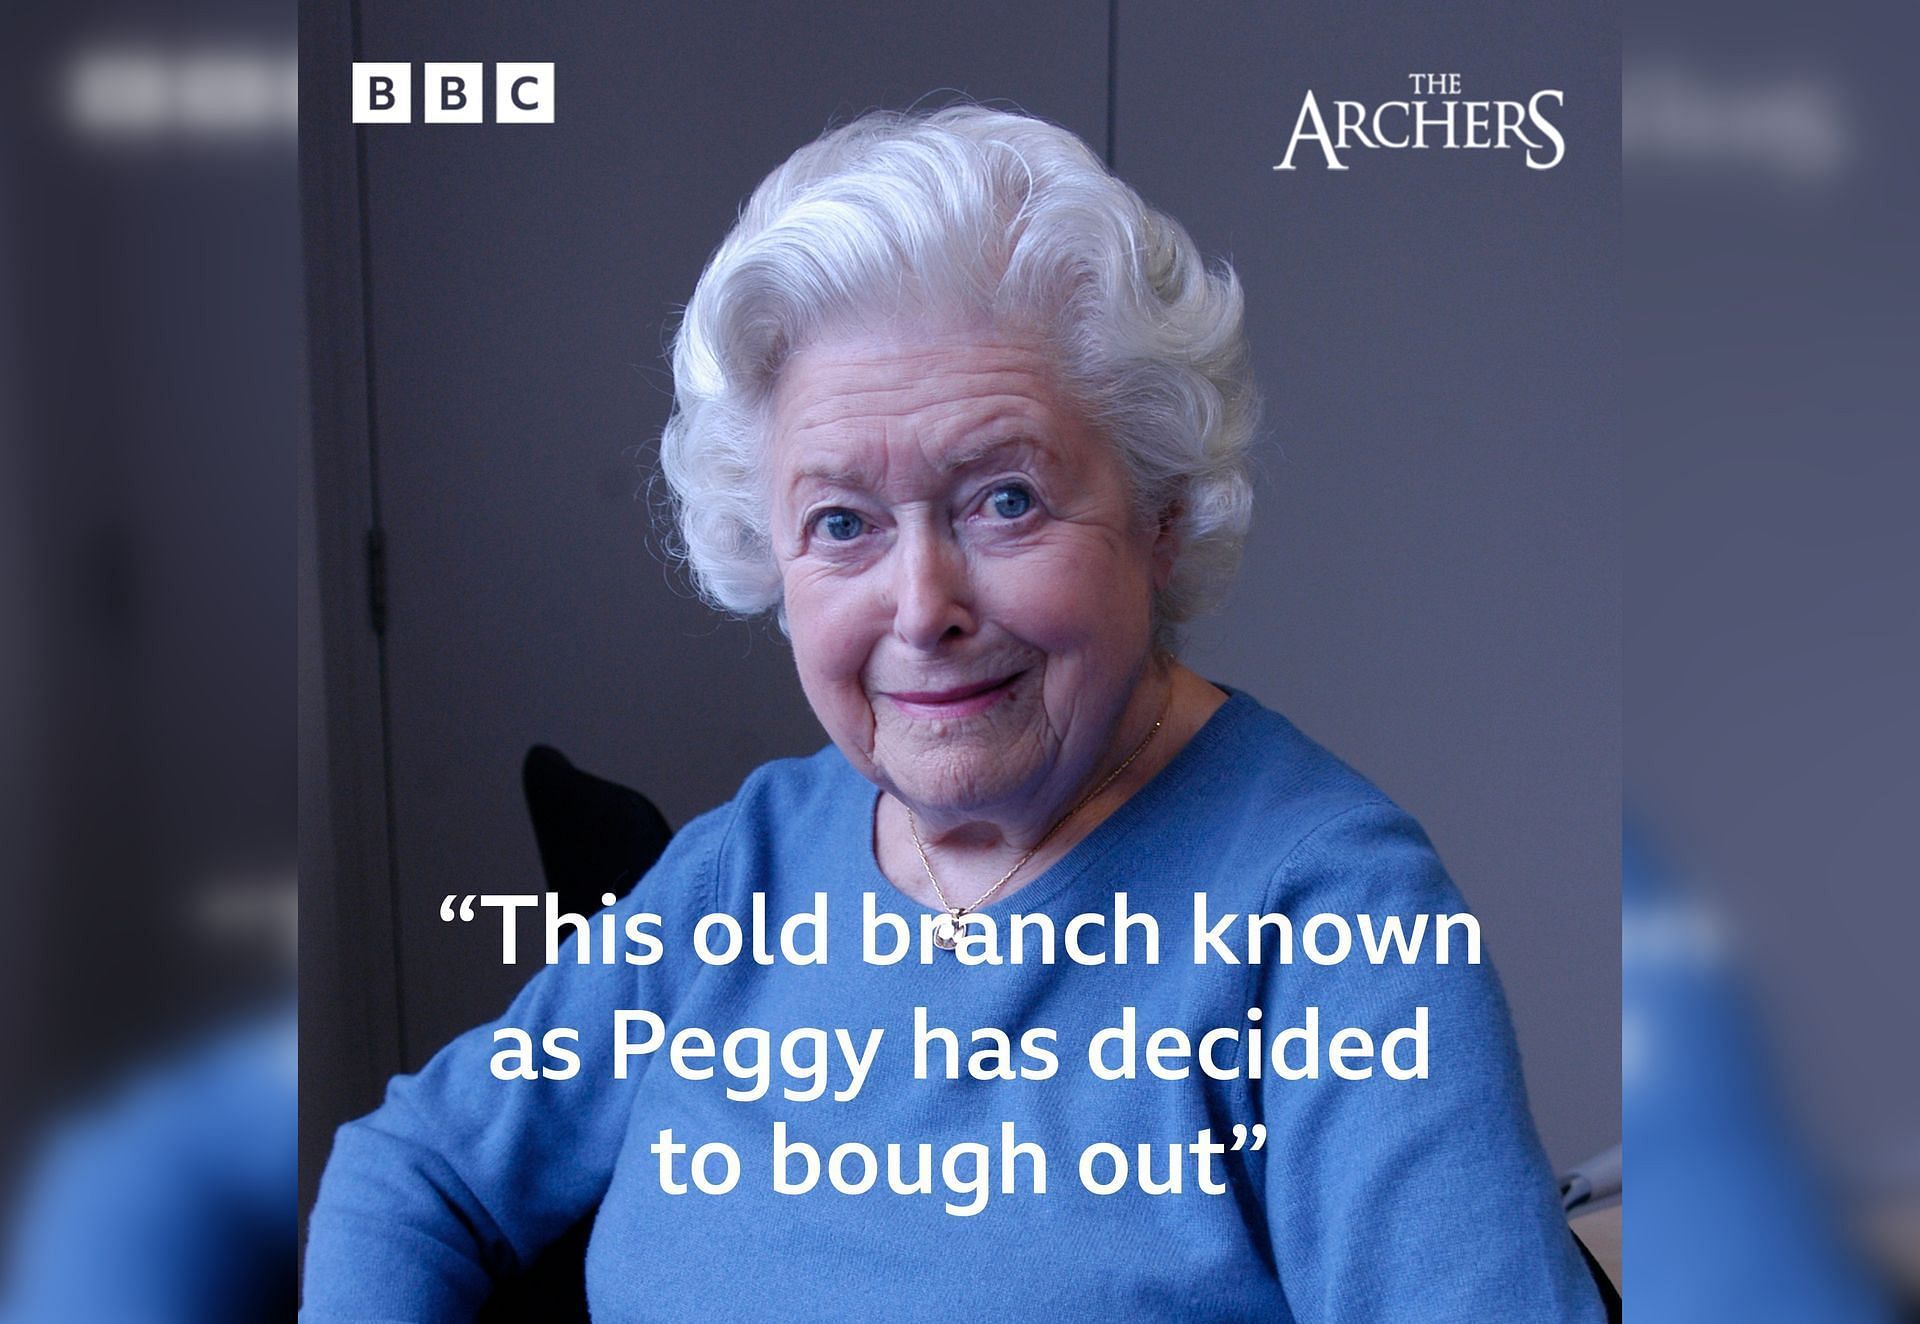 June Spencer announces her retirement from The Archers at 103 (Image via The Archers/BBC/Twitter)